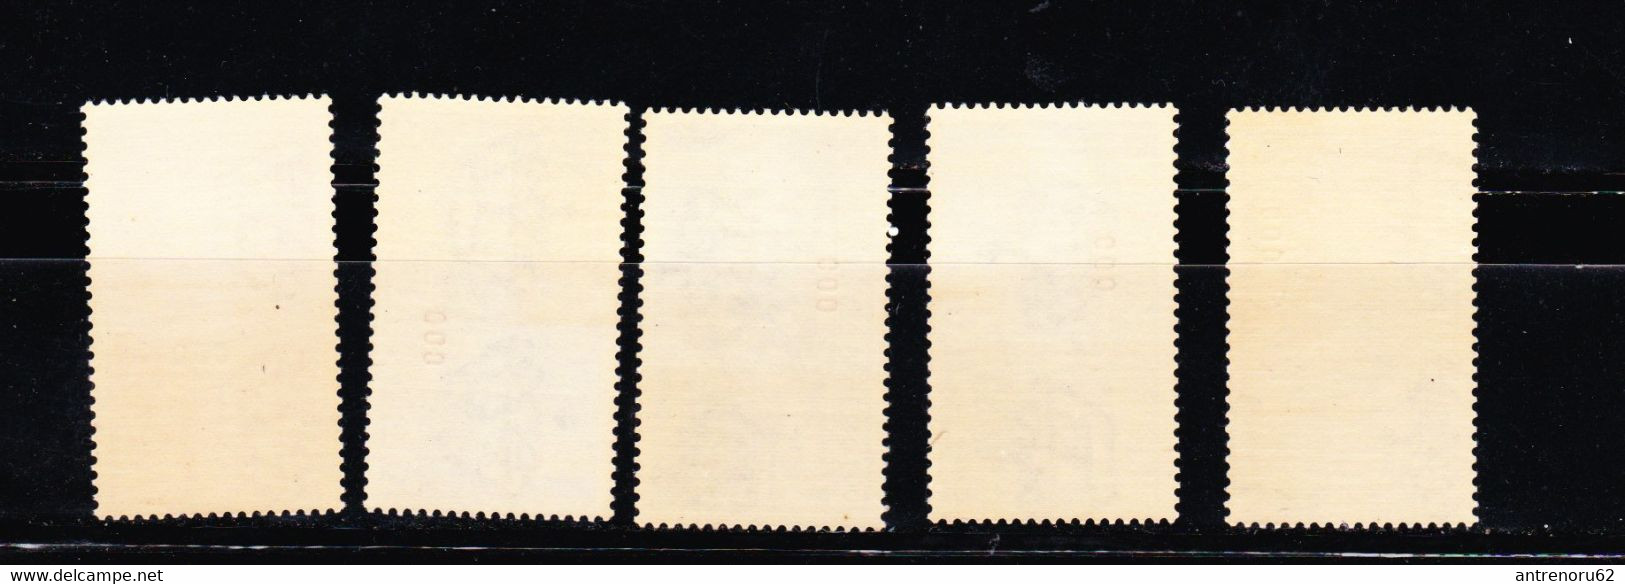 STAMPS-ITALY-COO-1930-UNUSED-MNH**-SEE-SCAN - Egeo (Coo)